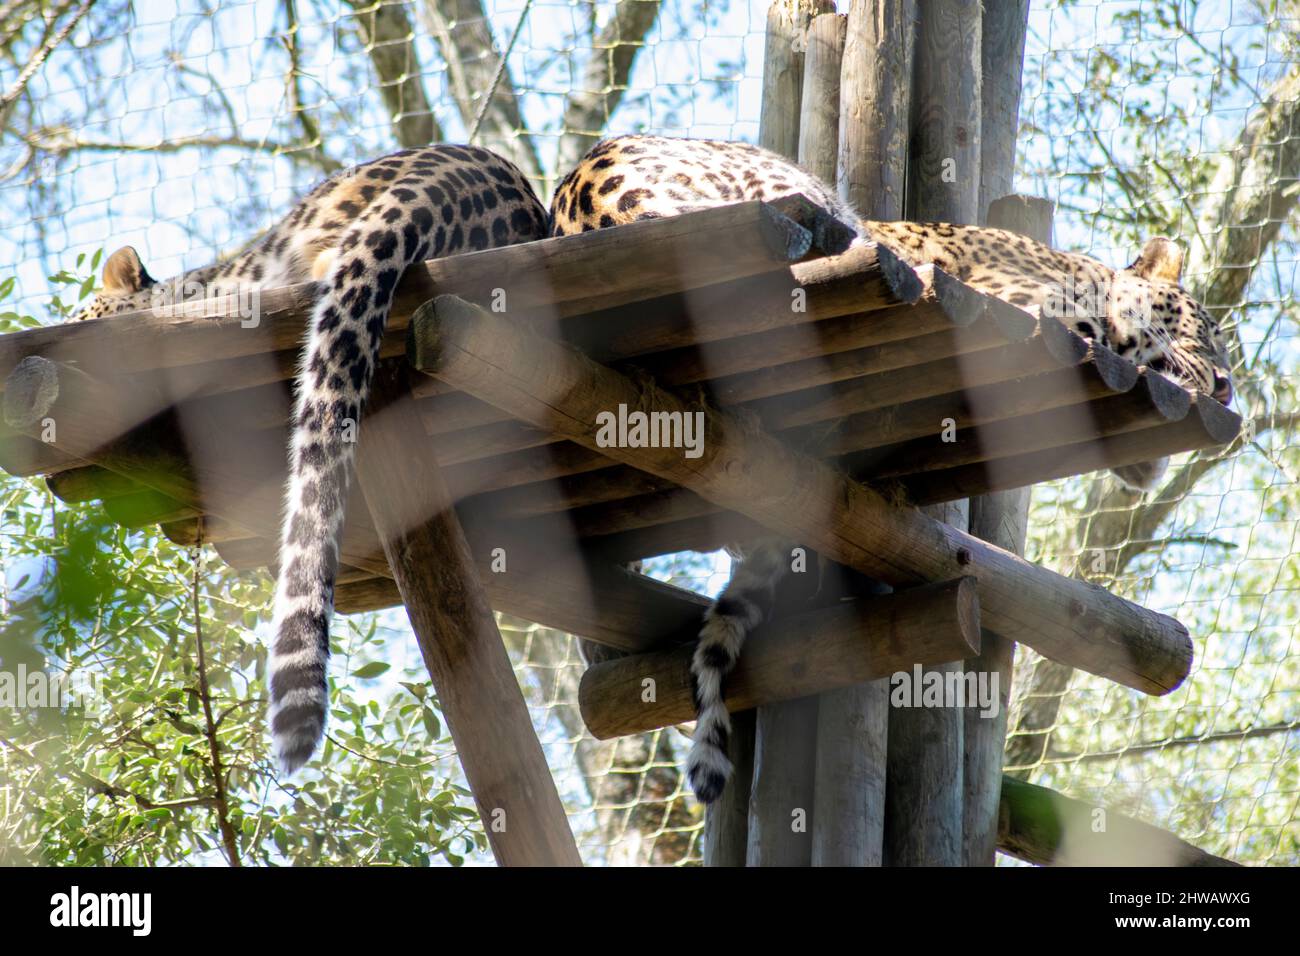 Panthera pardus saxicolor, endangered specie. Two animals resting on a tree platform. Lisbon zoo, Portugal. Persian Leopard zoo programs. Stock Photo